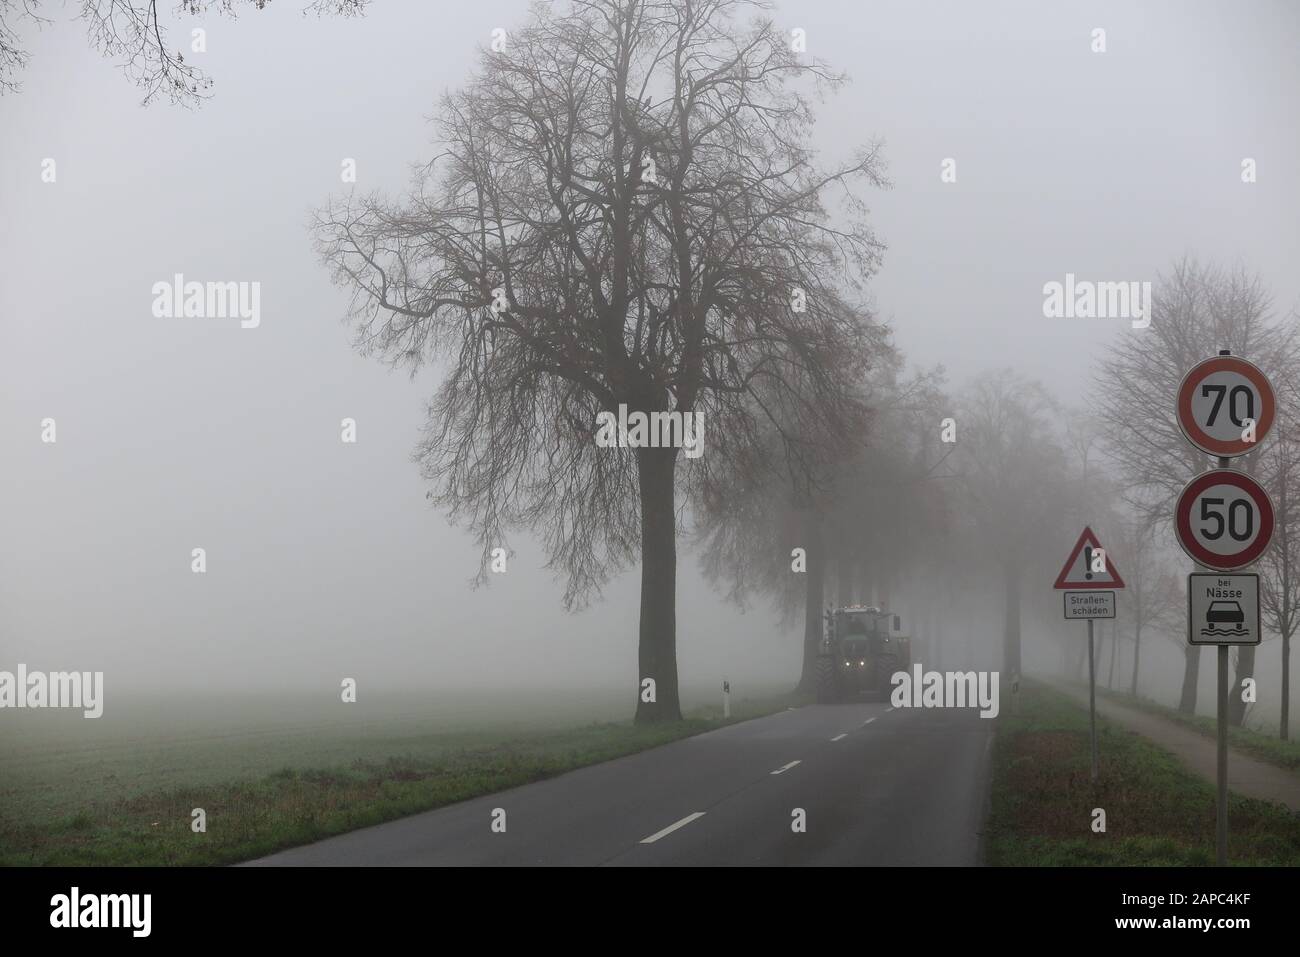 Poor visibility from fog in winter morning: View on german country road through forest with bare trees and headlights of car Stock Photo